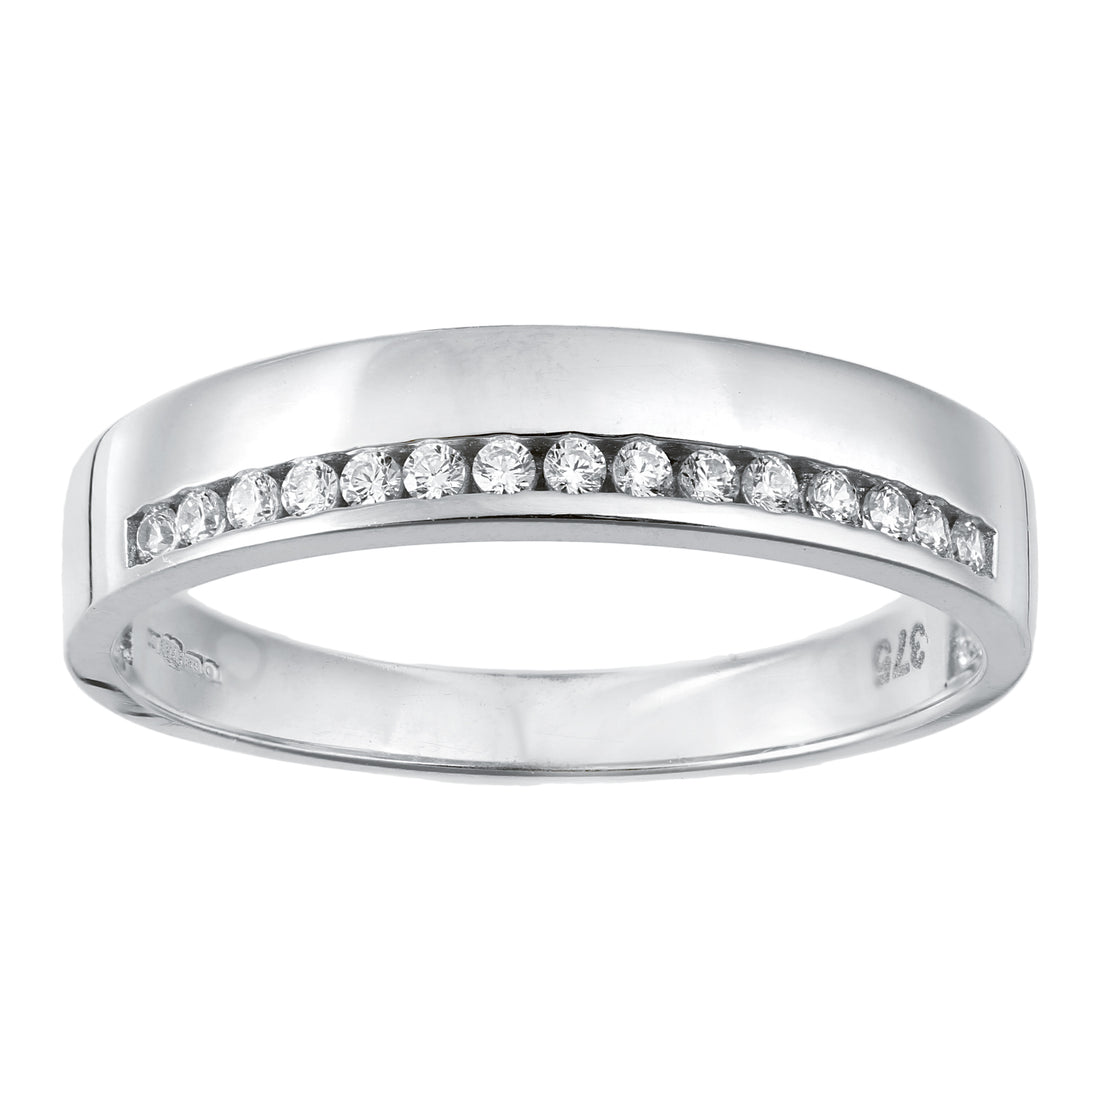 9 ct White Gold Wedding Band with CZ Stones Channel Set